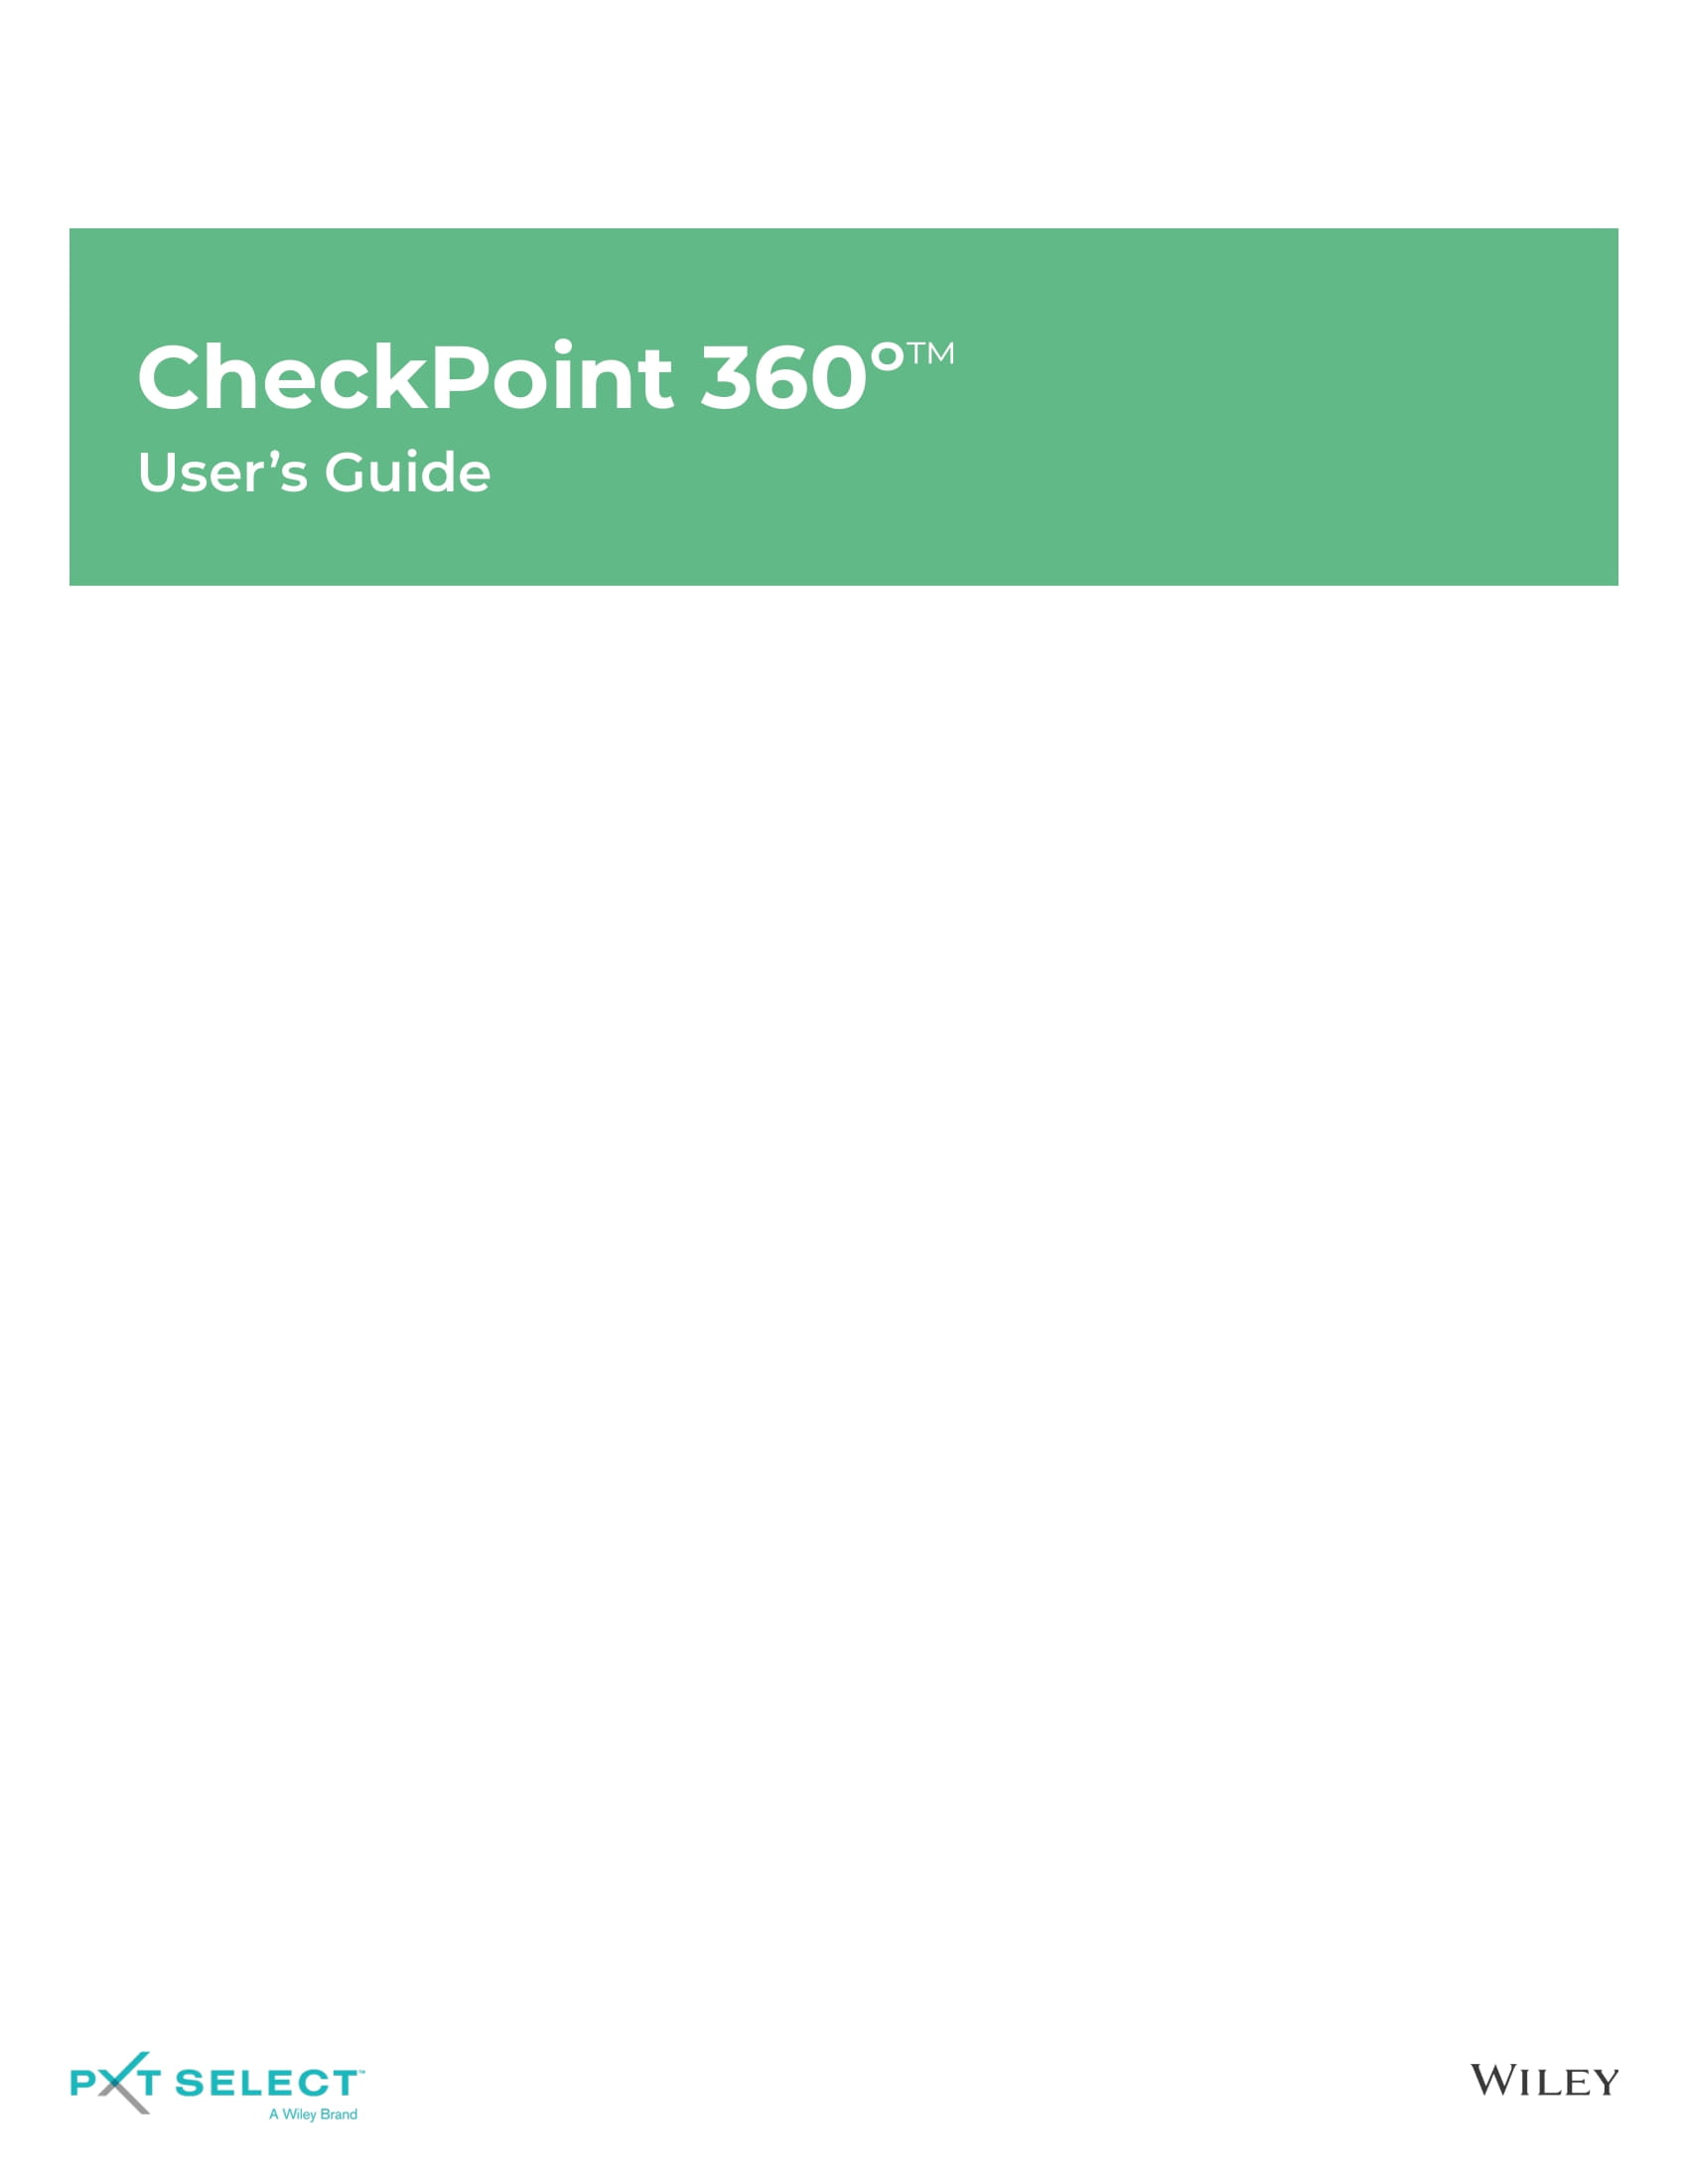 CheckPoint 360 User's Guide Image